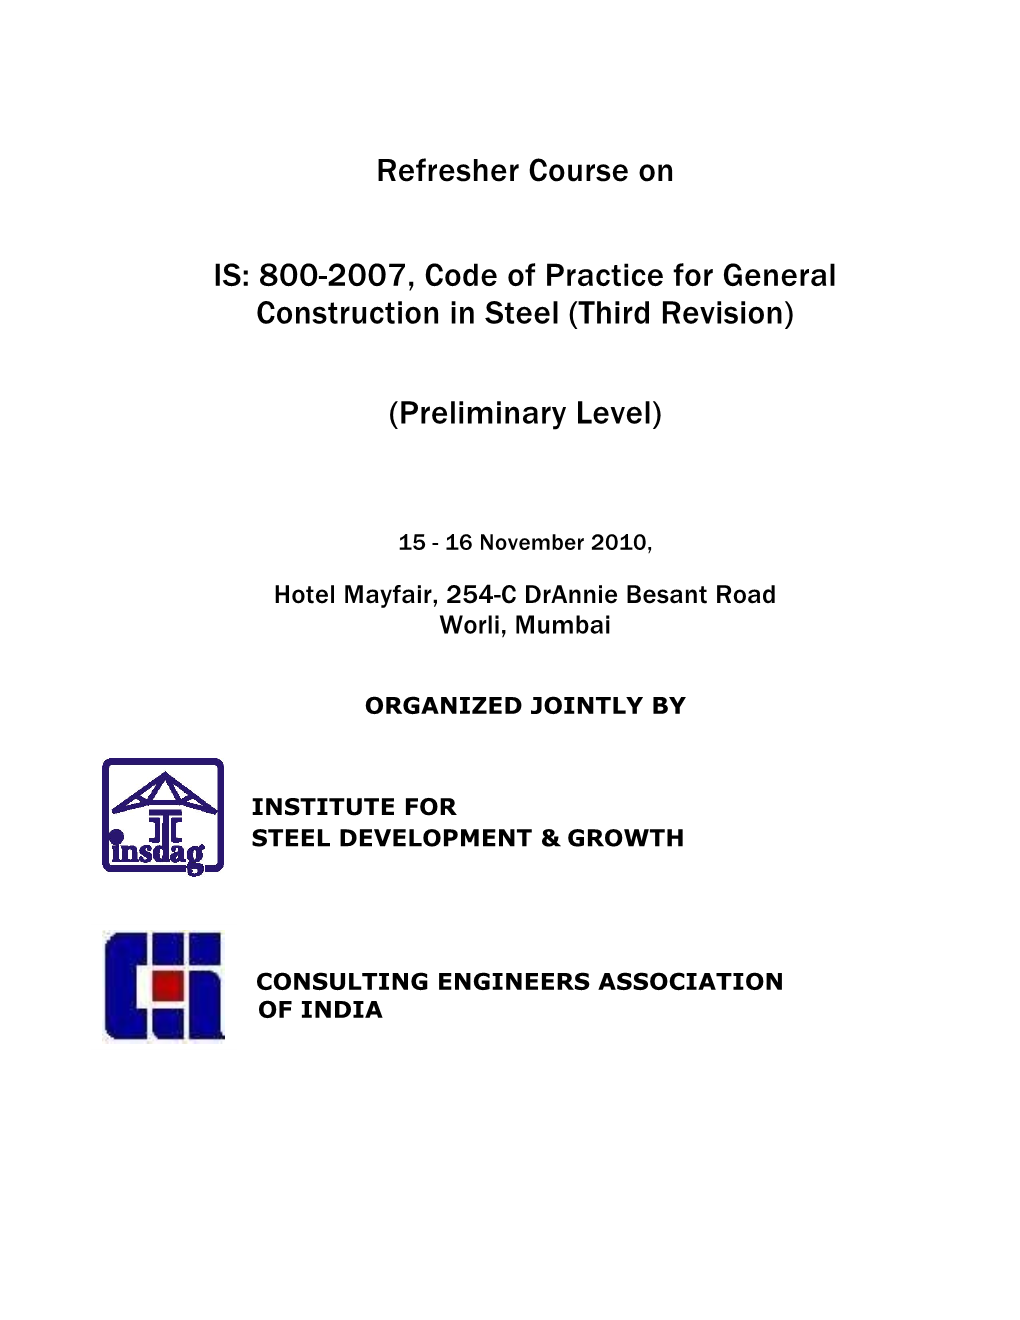 Refresher Course on IS: 800-2007, Code of Practice for General Construction in Steel (Third Revision) (Preliminary Level)